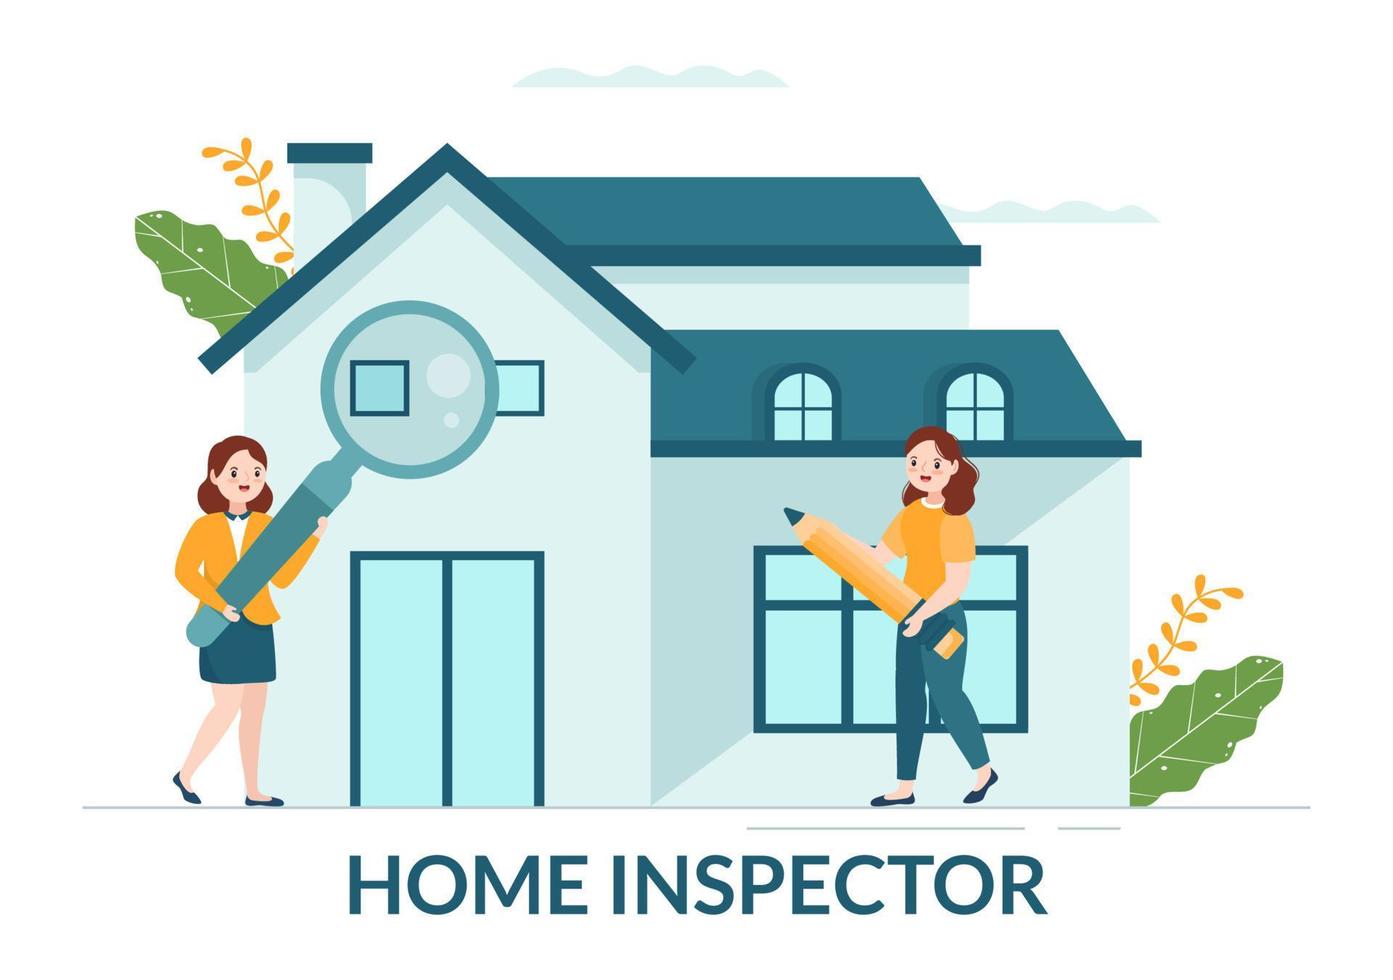 Home Inspector Checks the Condition of the House and Writes a Report for Maintenance Rent Search on Flat Cartoon Hand Drawn Template Illustration vector